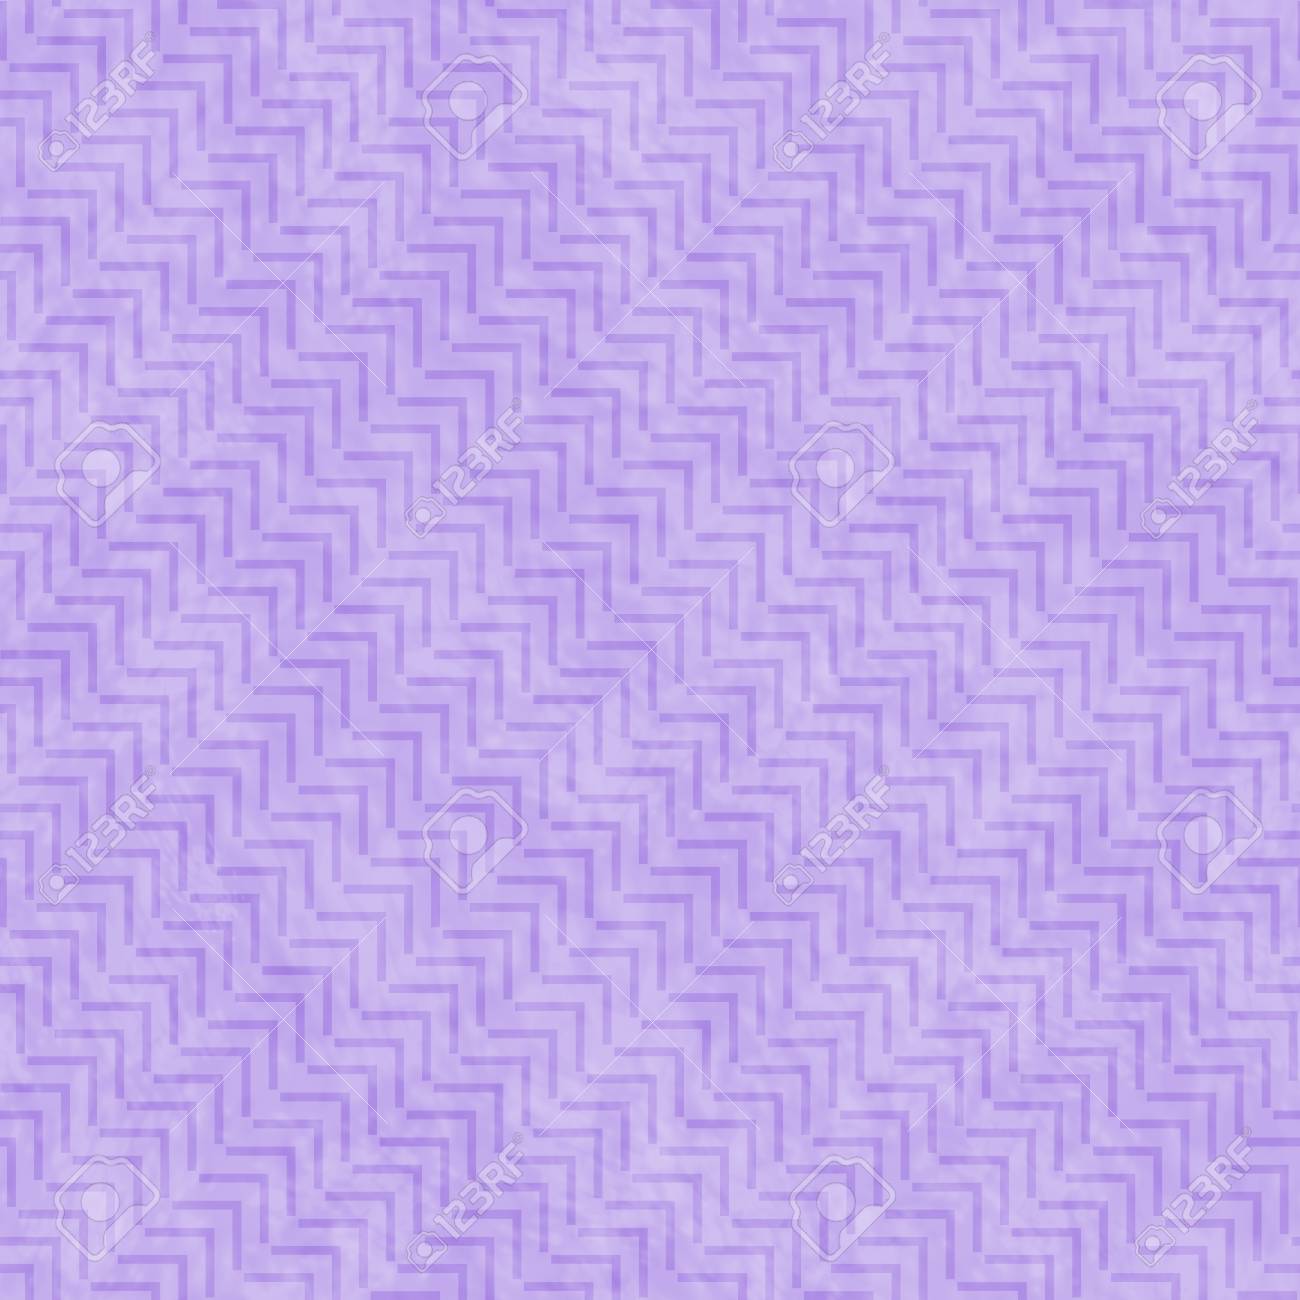 Purple Geometric Design Tile Pattern Repeat Background That Is